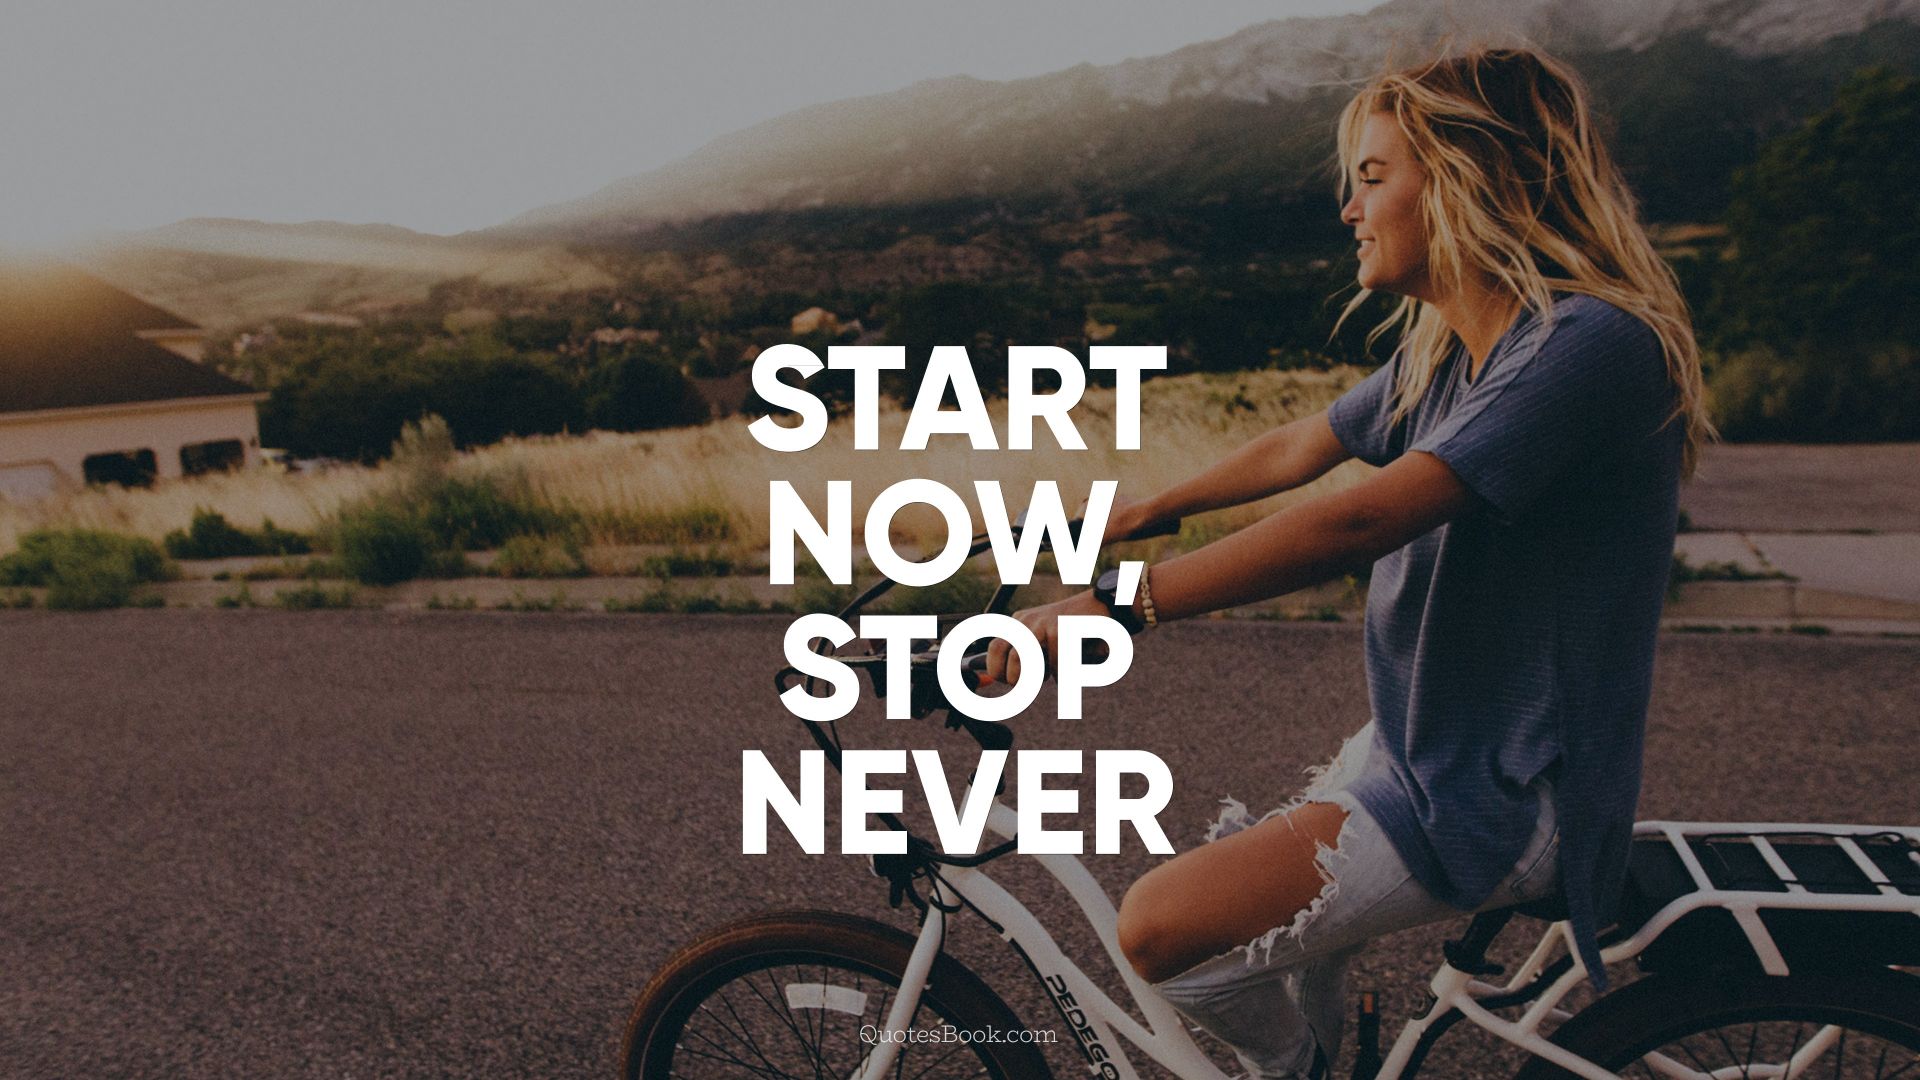 Start now, stop never
